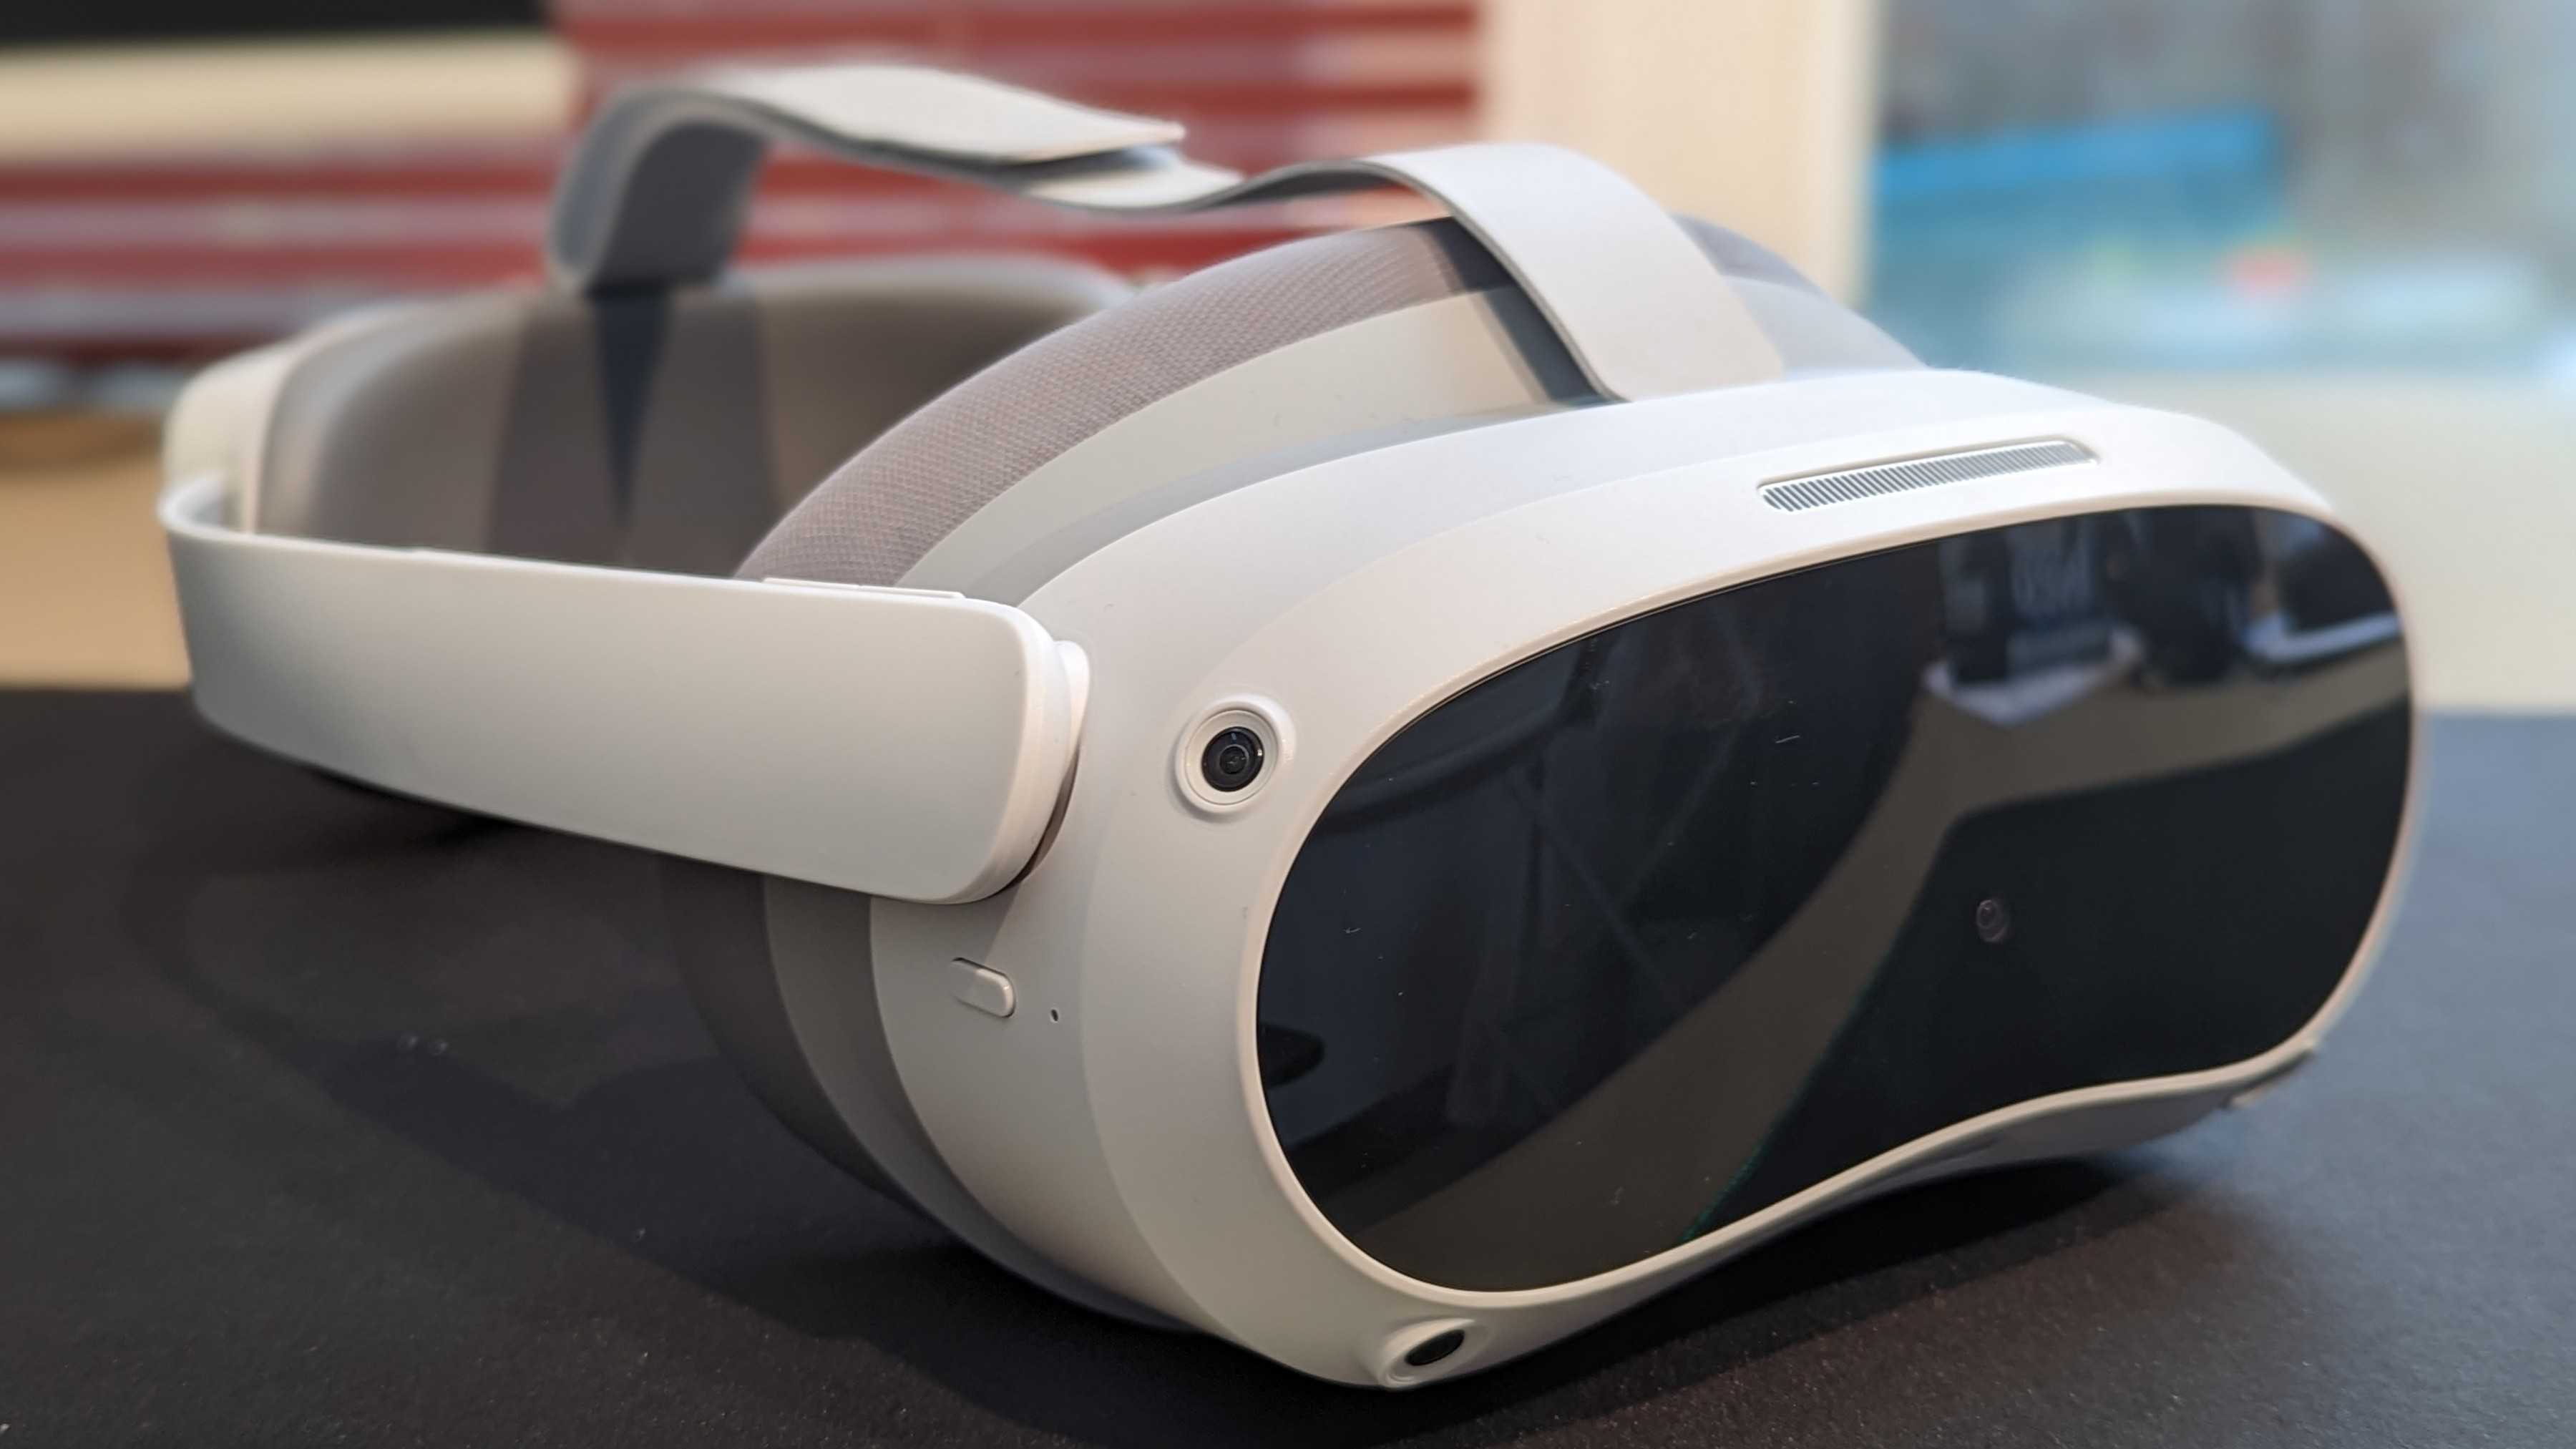 Does The Budget-Friendly PICO 4 VR Headset Live Up To The Hype? Let's Find  Out